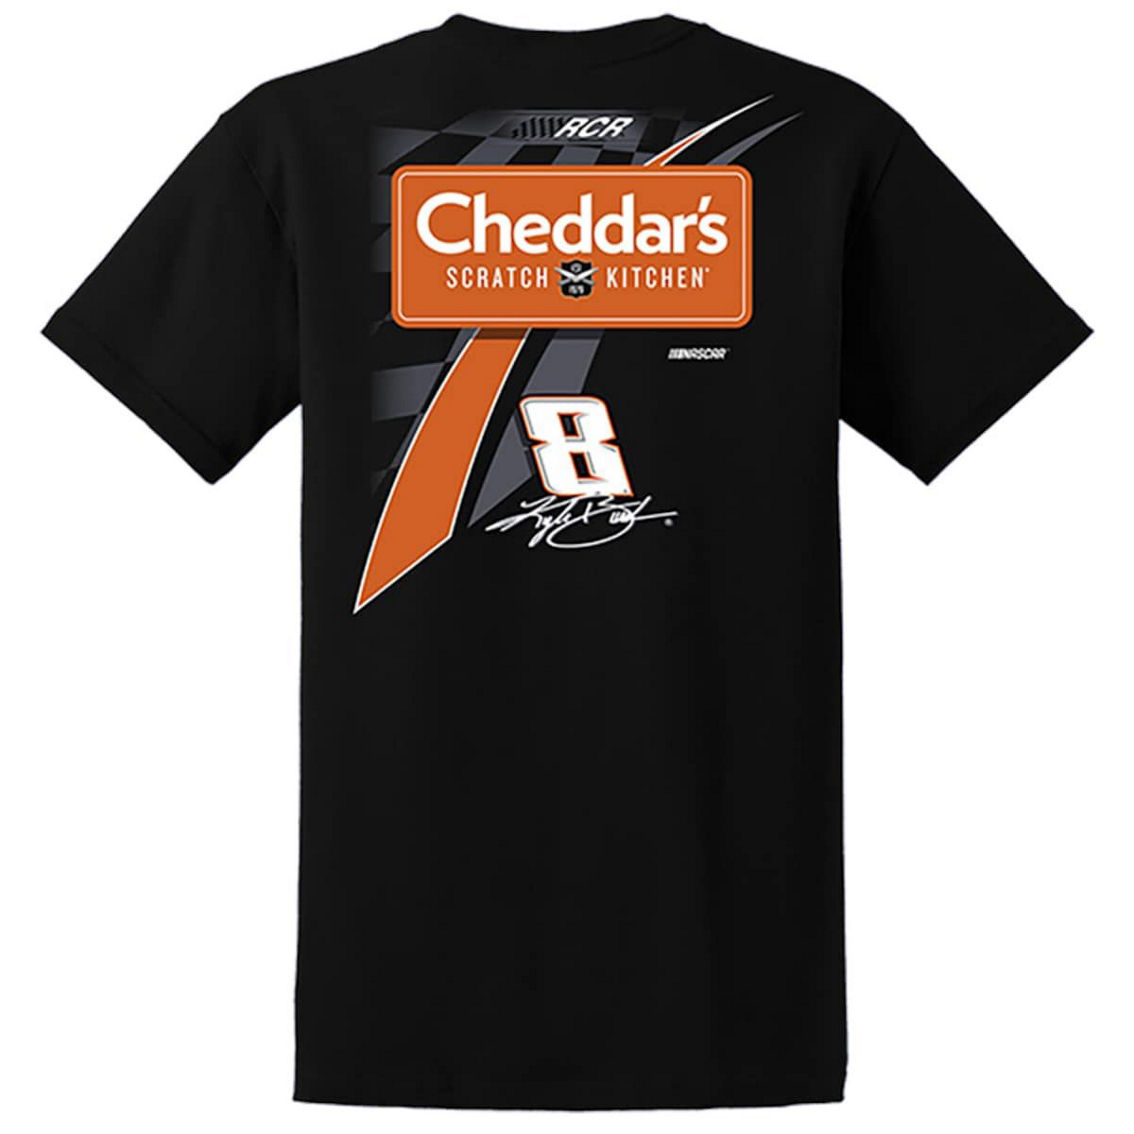 Richard Childress Racing Team Collection Men's Richard Childress Racing Team Collection Black Kyle Busch Cheddar's Lifestyle T-Shirt - Image 4 of 4